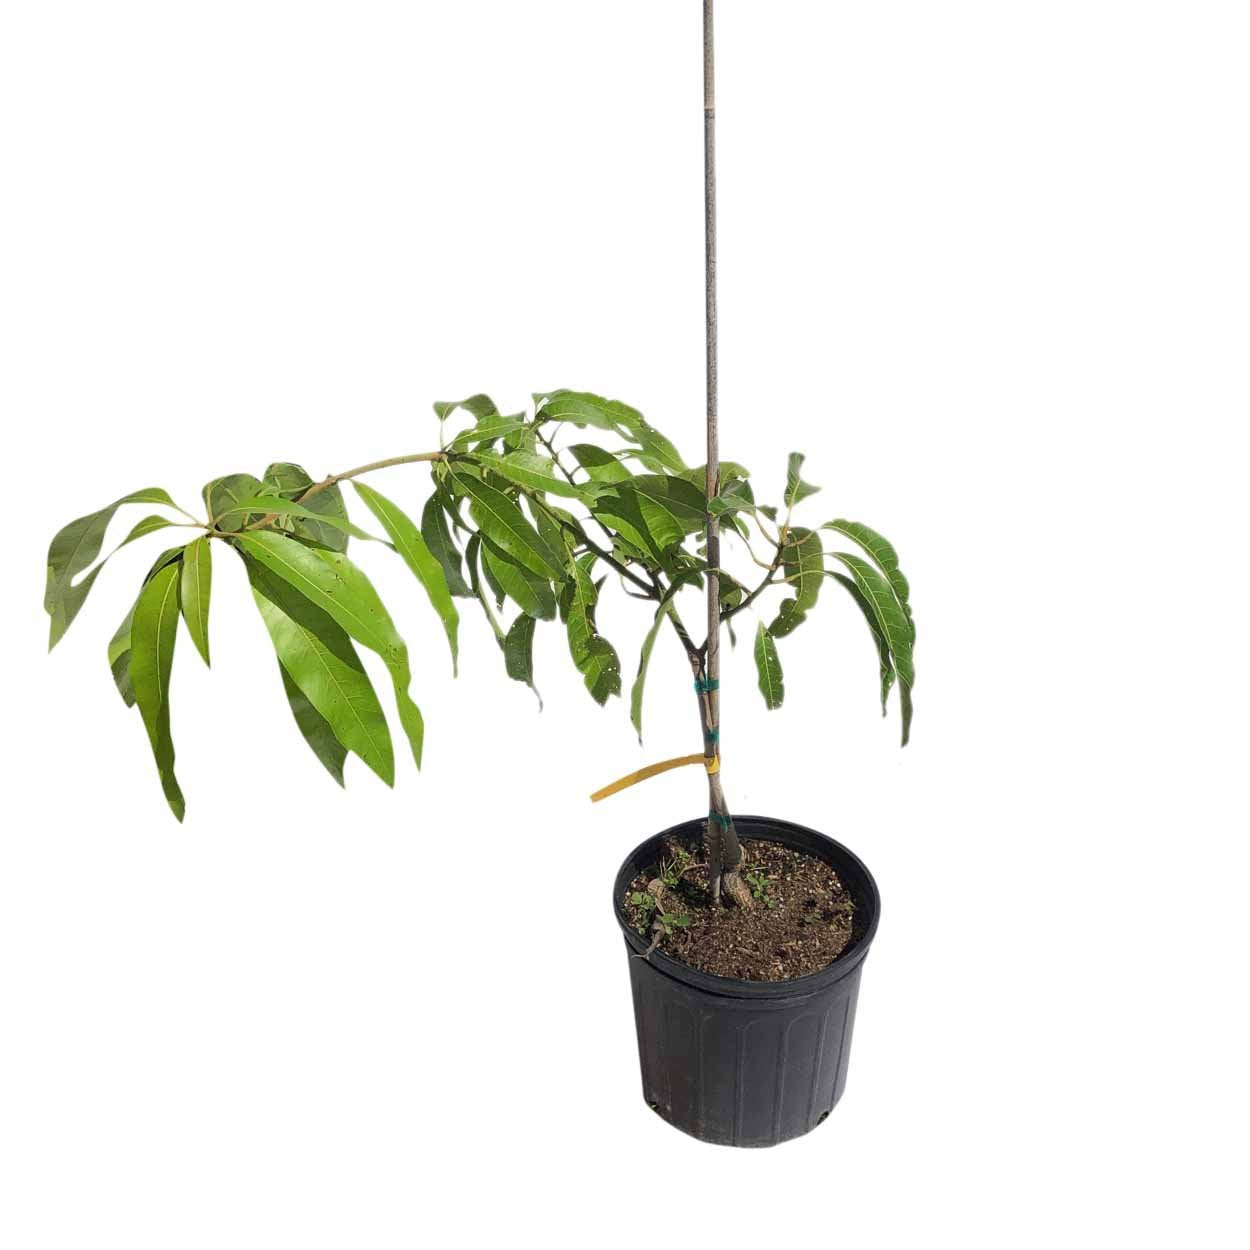 Lancetilla Mango Tree, Grafted, 3-Gal Container from Florida